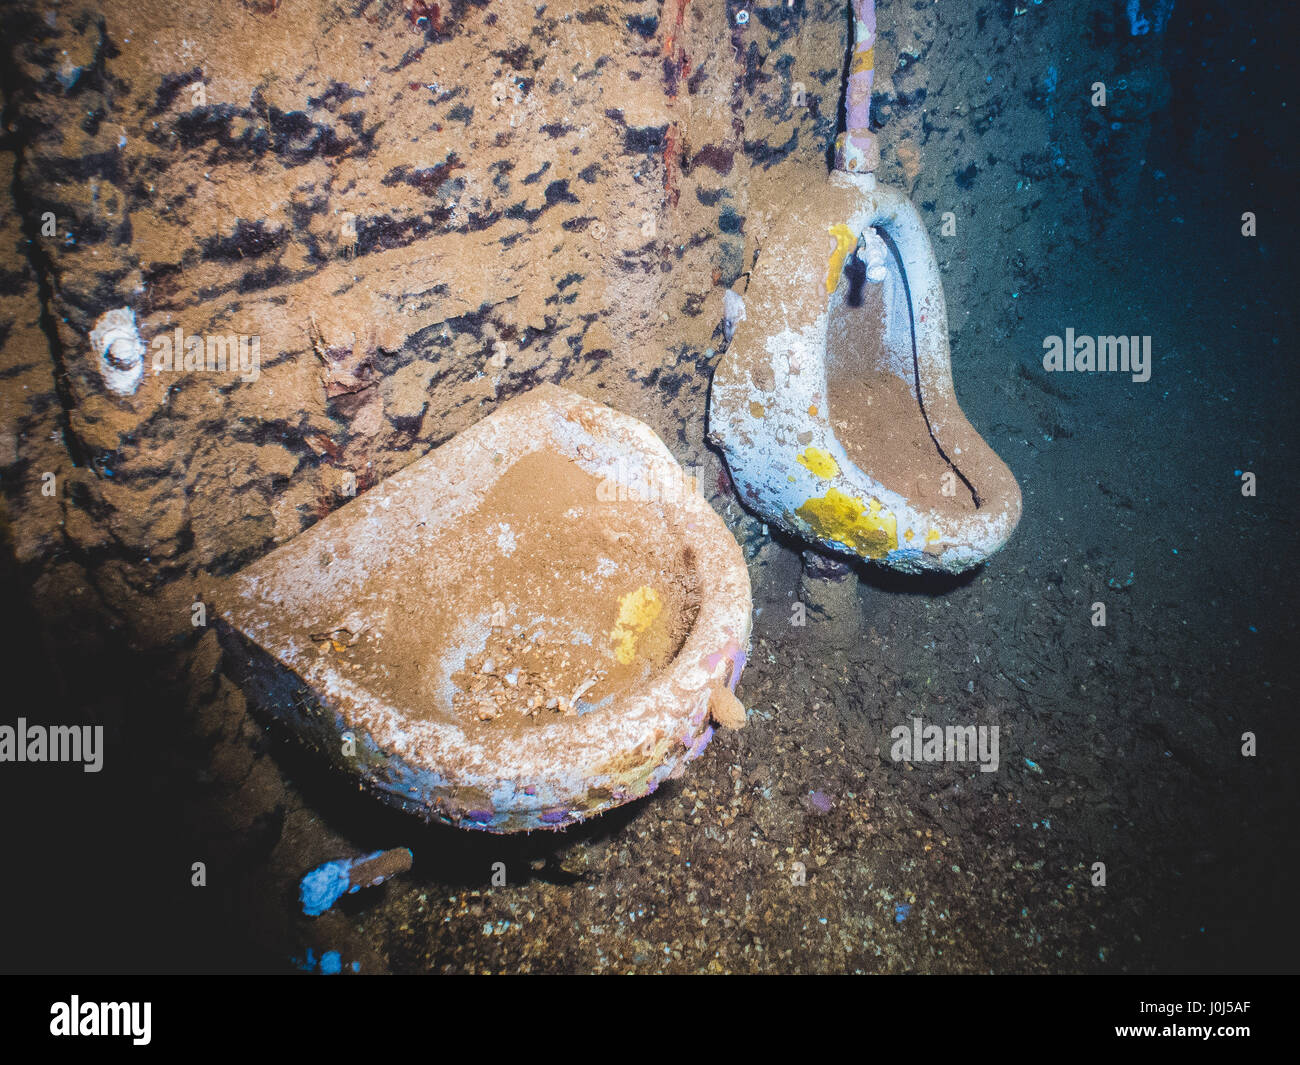 Weno, Micronesia. 15th Feb, 2016. Scuba diving pictures of corals, halcyons and fishes over the "Operation Hailstone" WWII wrecks in the True Lagoon, Micronesia Credit: Alessandro Bosio/Pacific Press/Alamy Live News Stock Photo